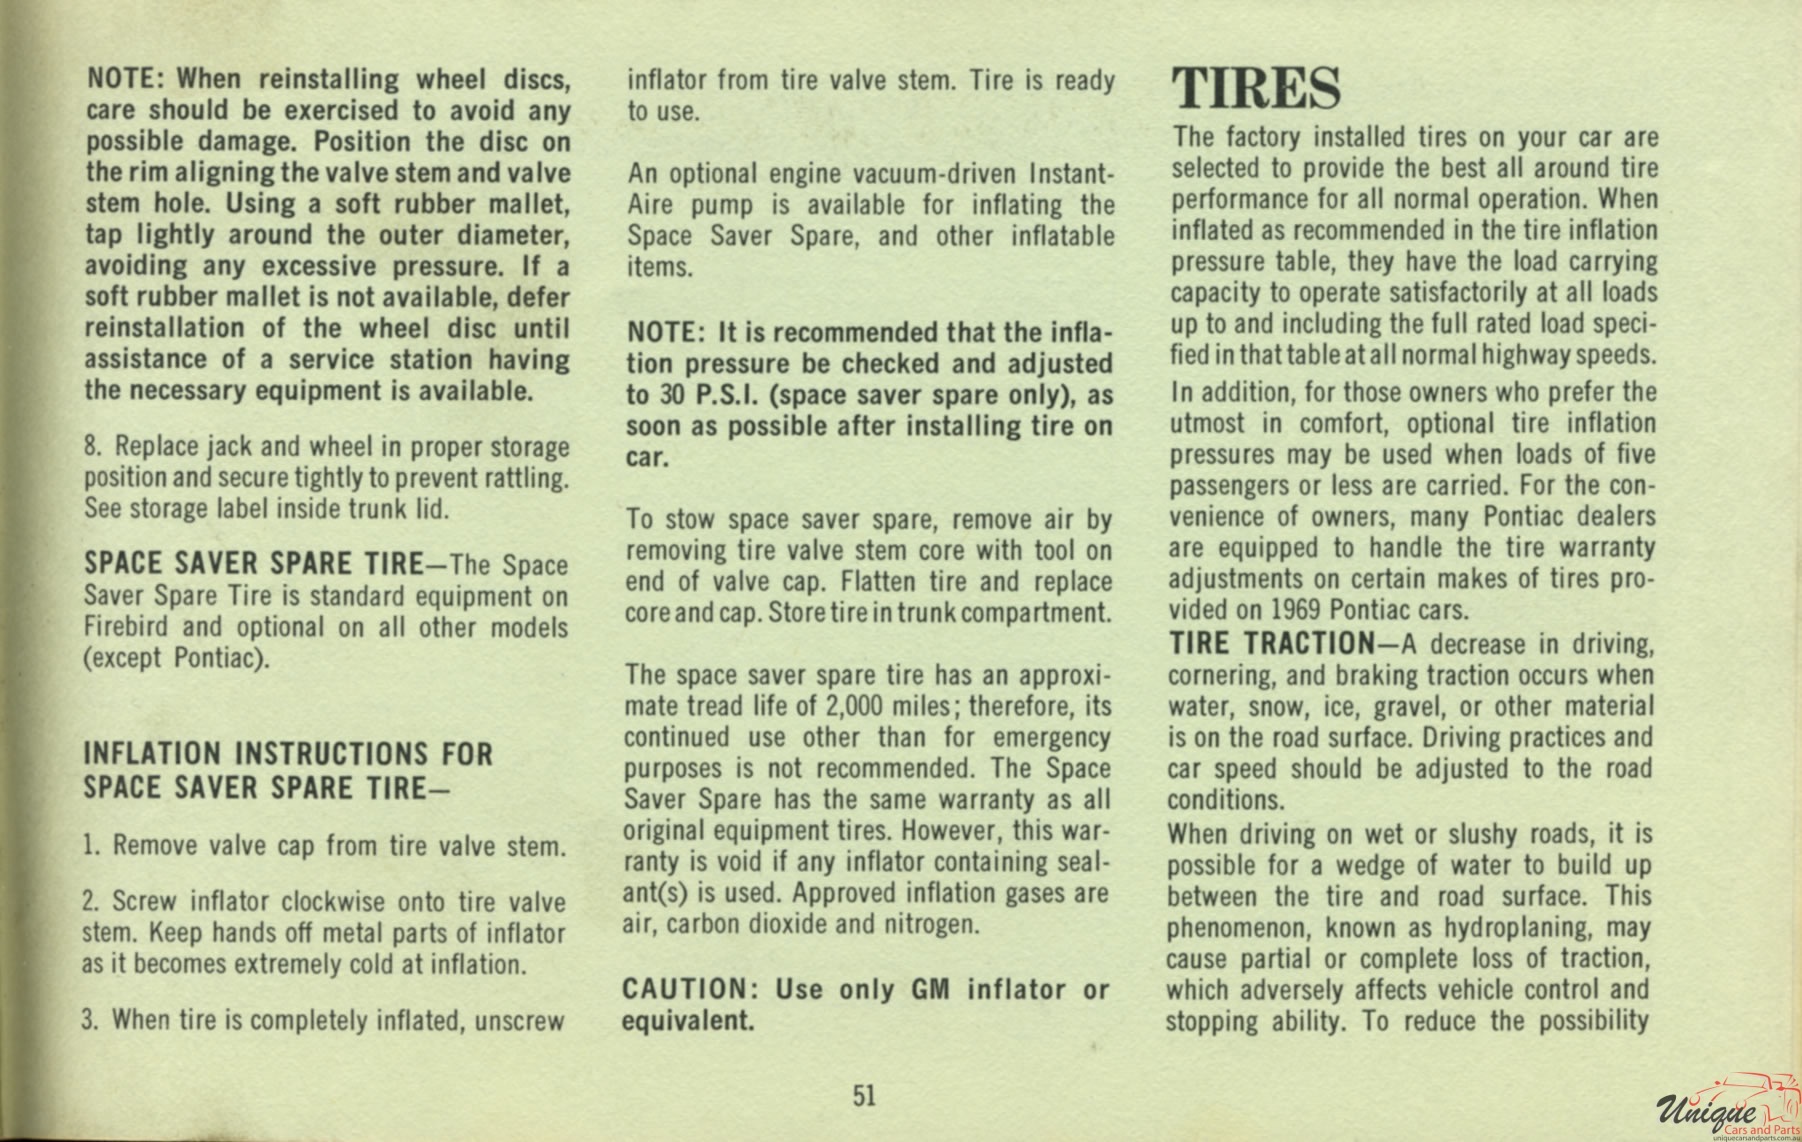 1969 Pontiac Owners Manual Page 49